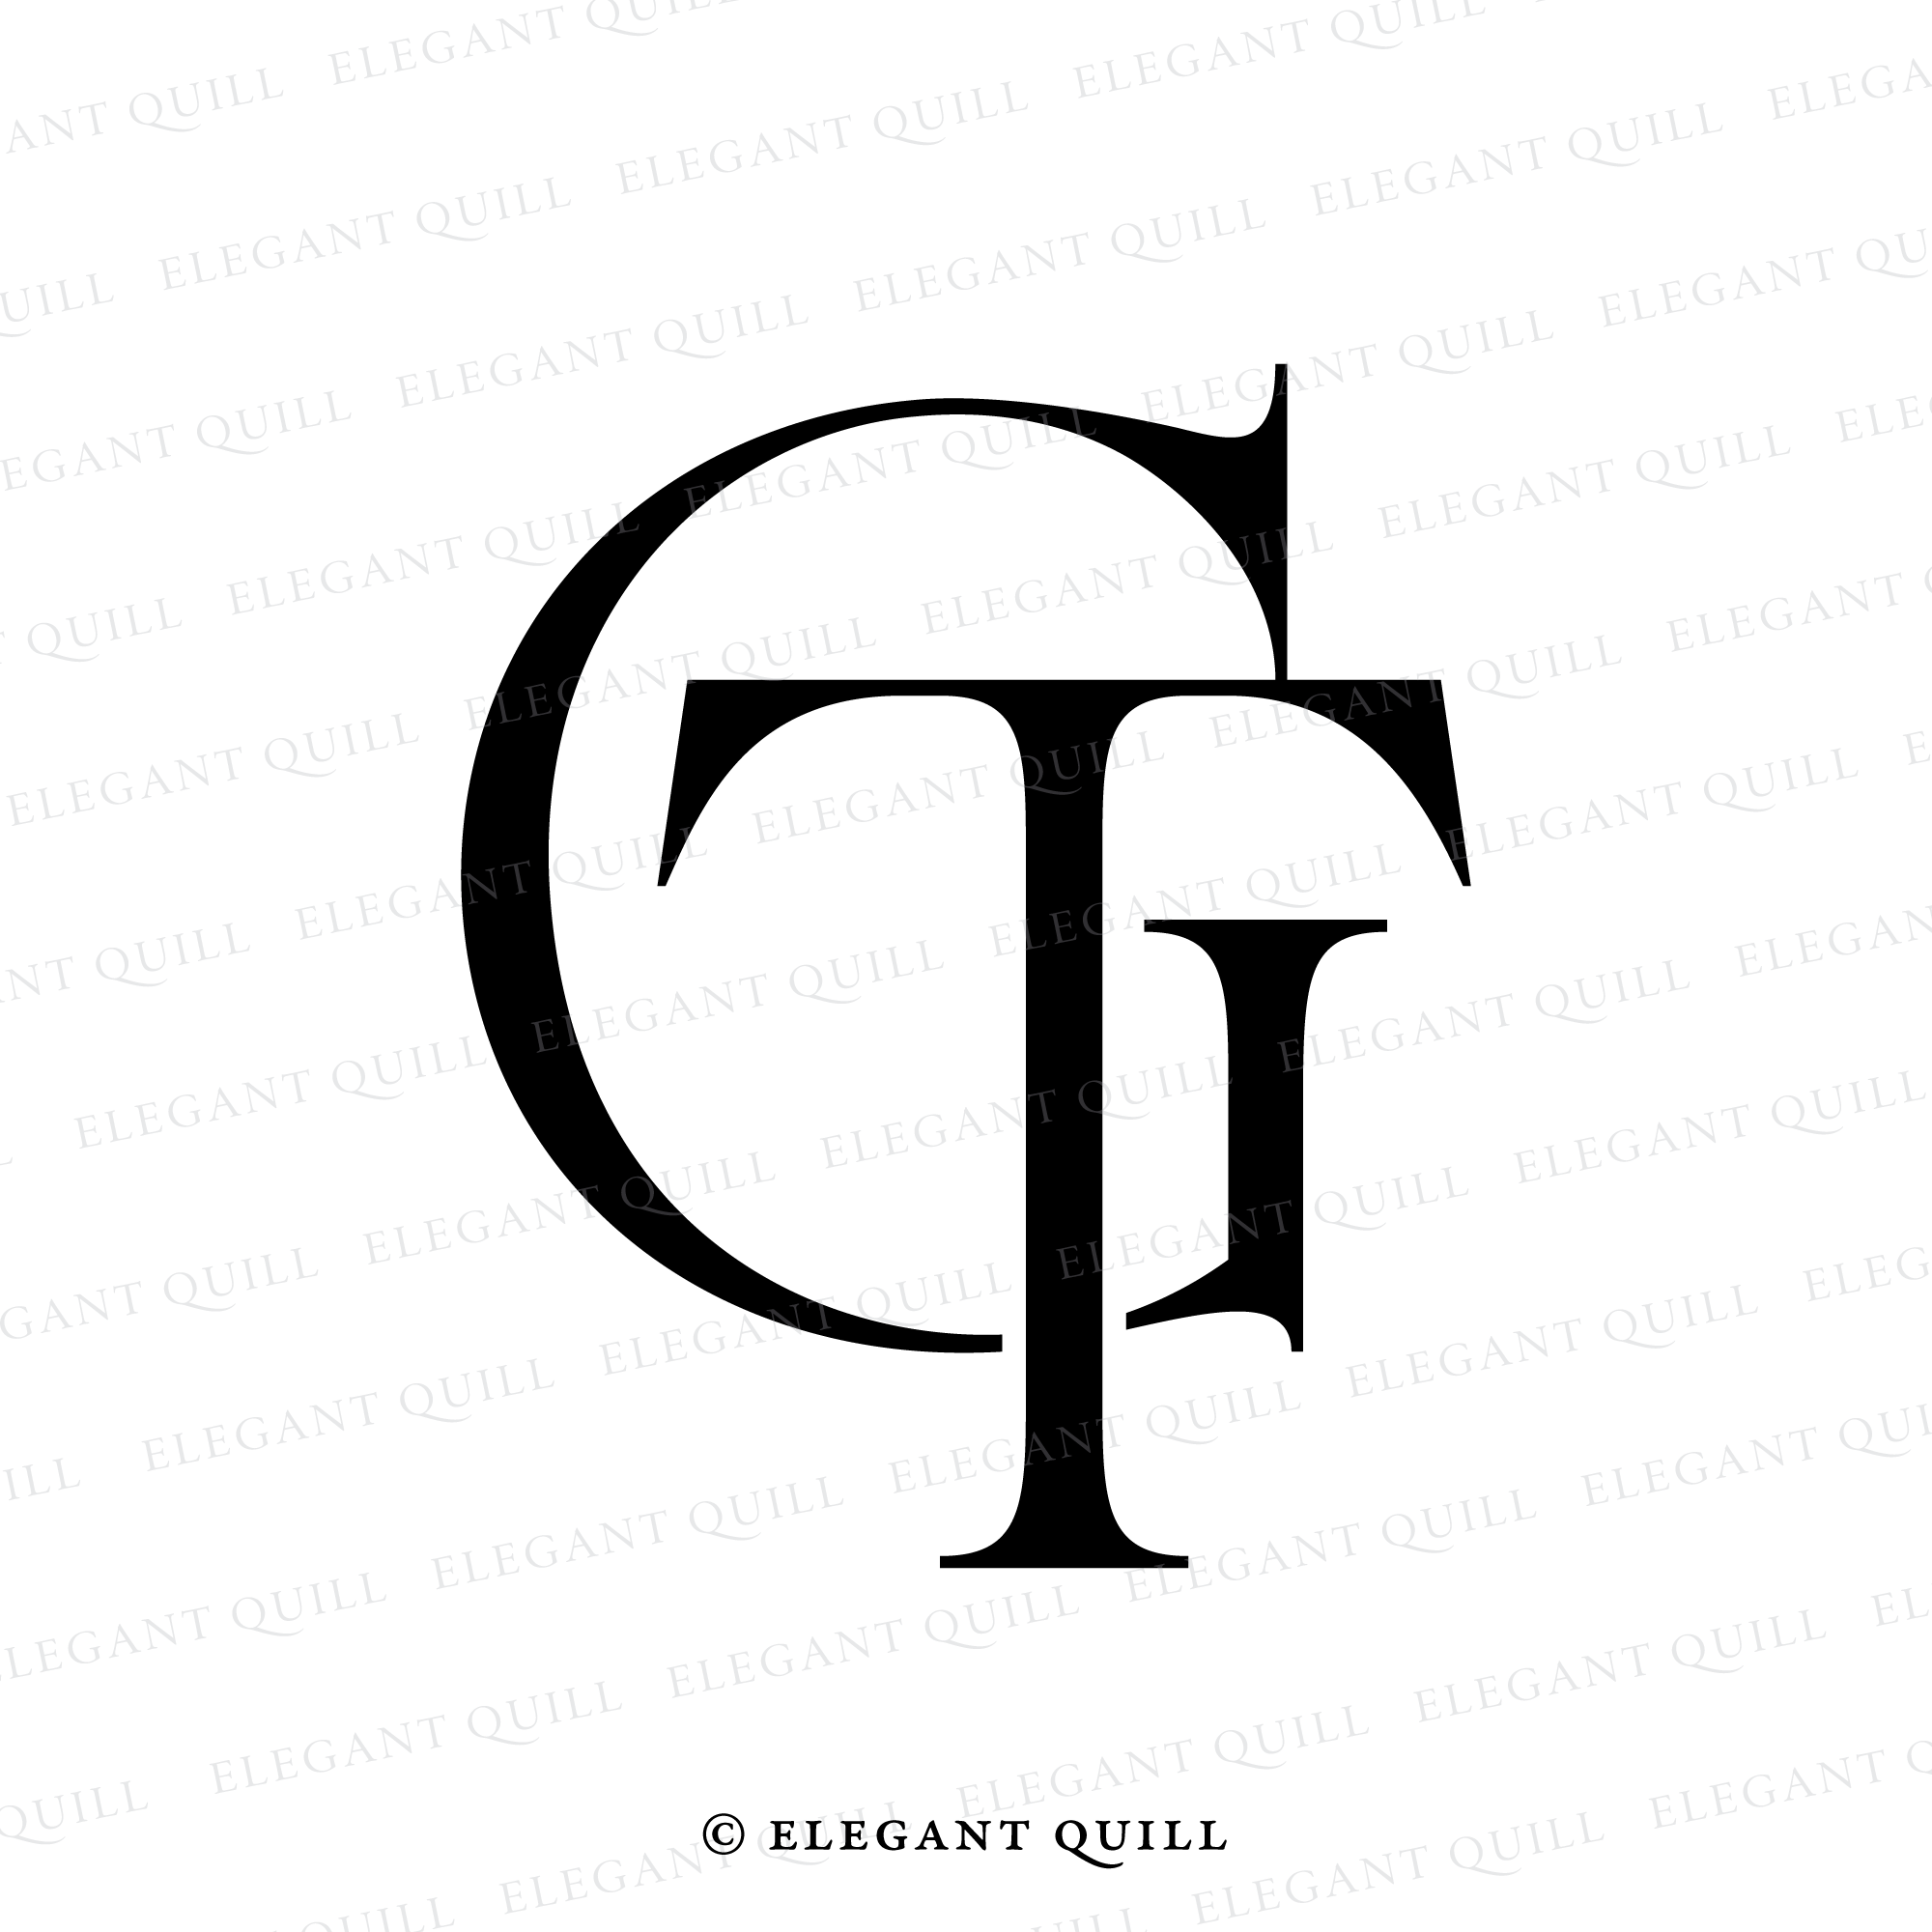 Gt Logo Design Stock Photos and Pictures - 6,542 Images | Shutterstock